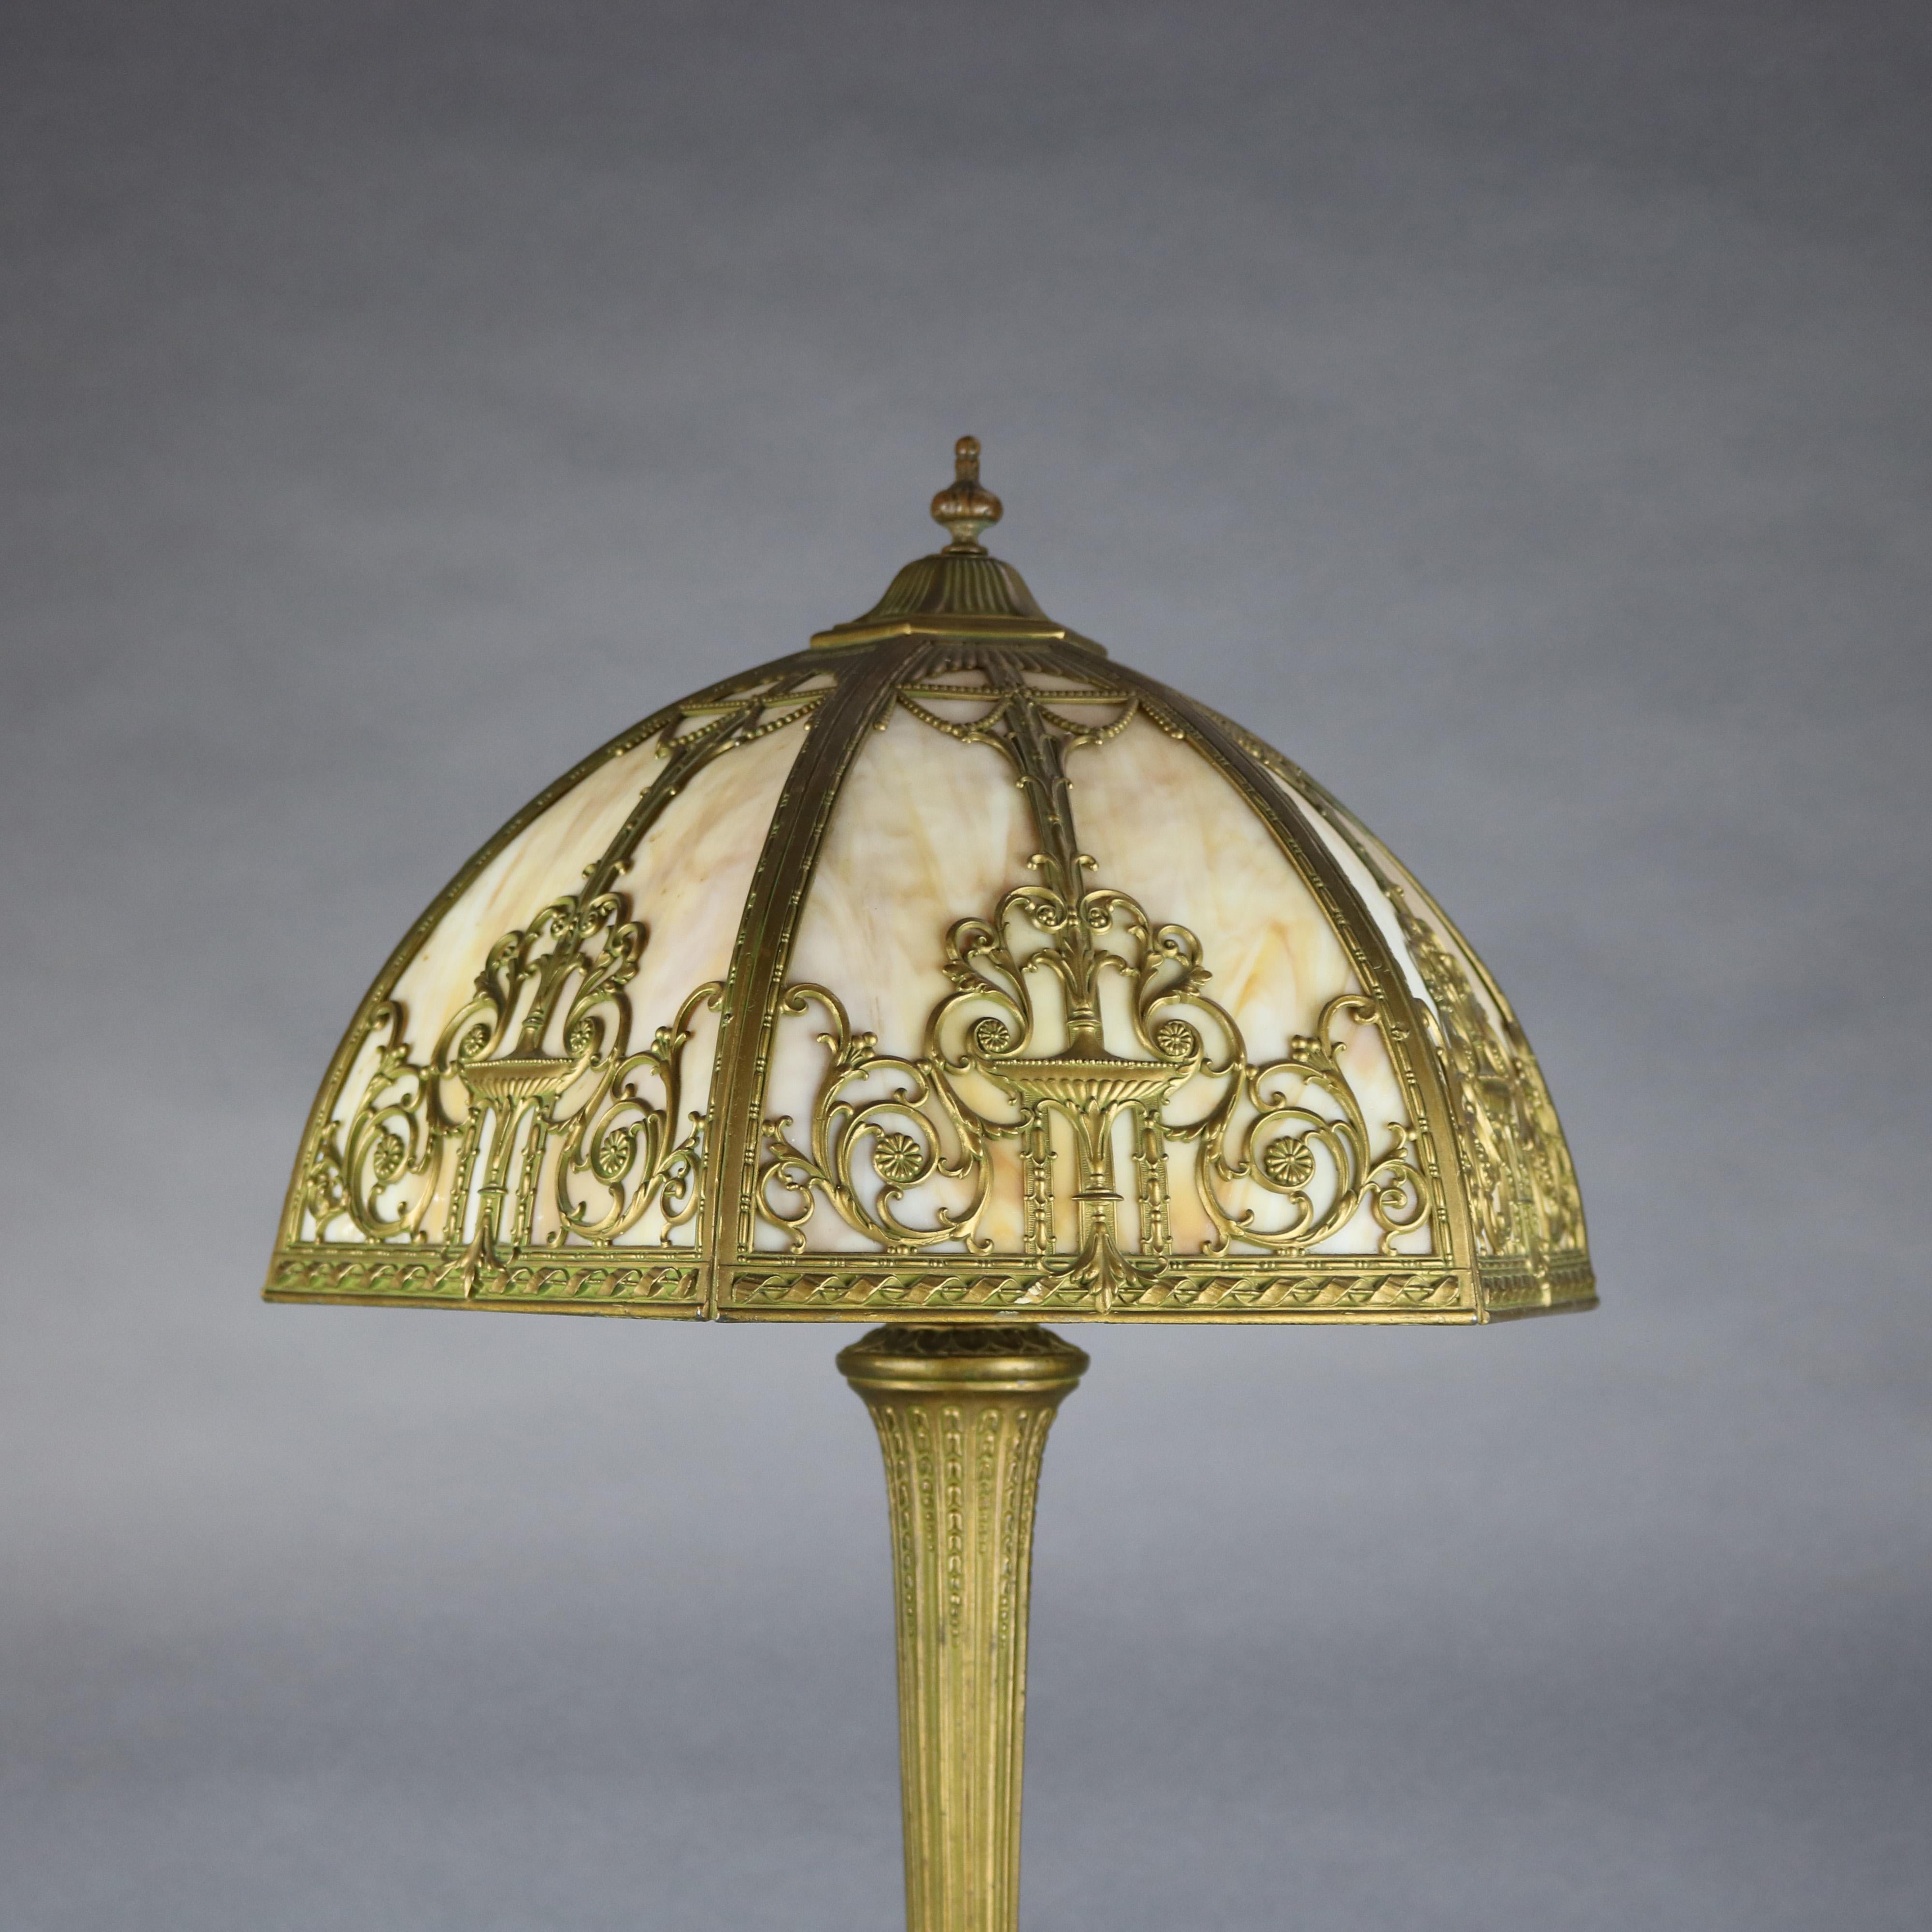 Antique Arts & Crafts table lamp in the manner of Bradley and Hubbard offers neoclassical urn, scrolled foliate and floral filigree cast shade housing bent slag glass panels and surmounting cast double socket base, c1920

Measures: 25